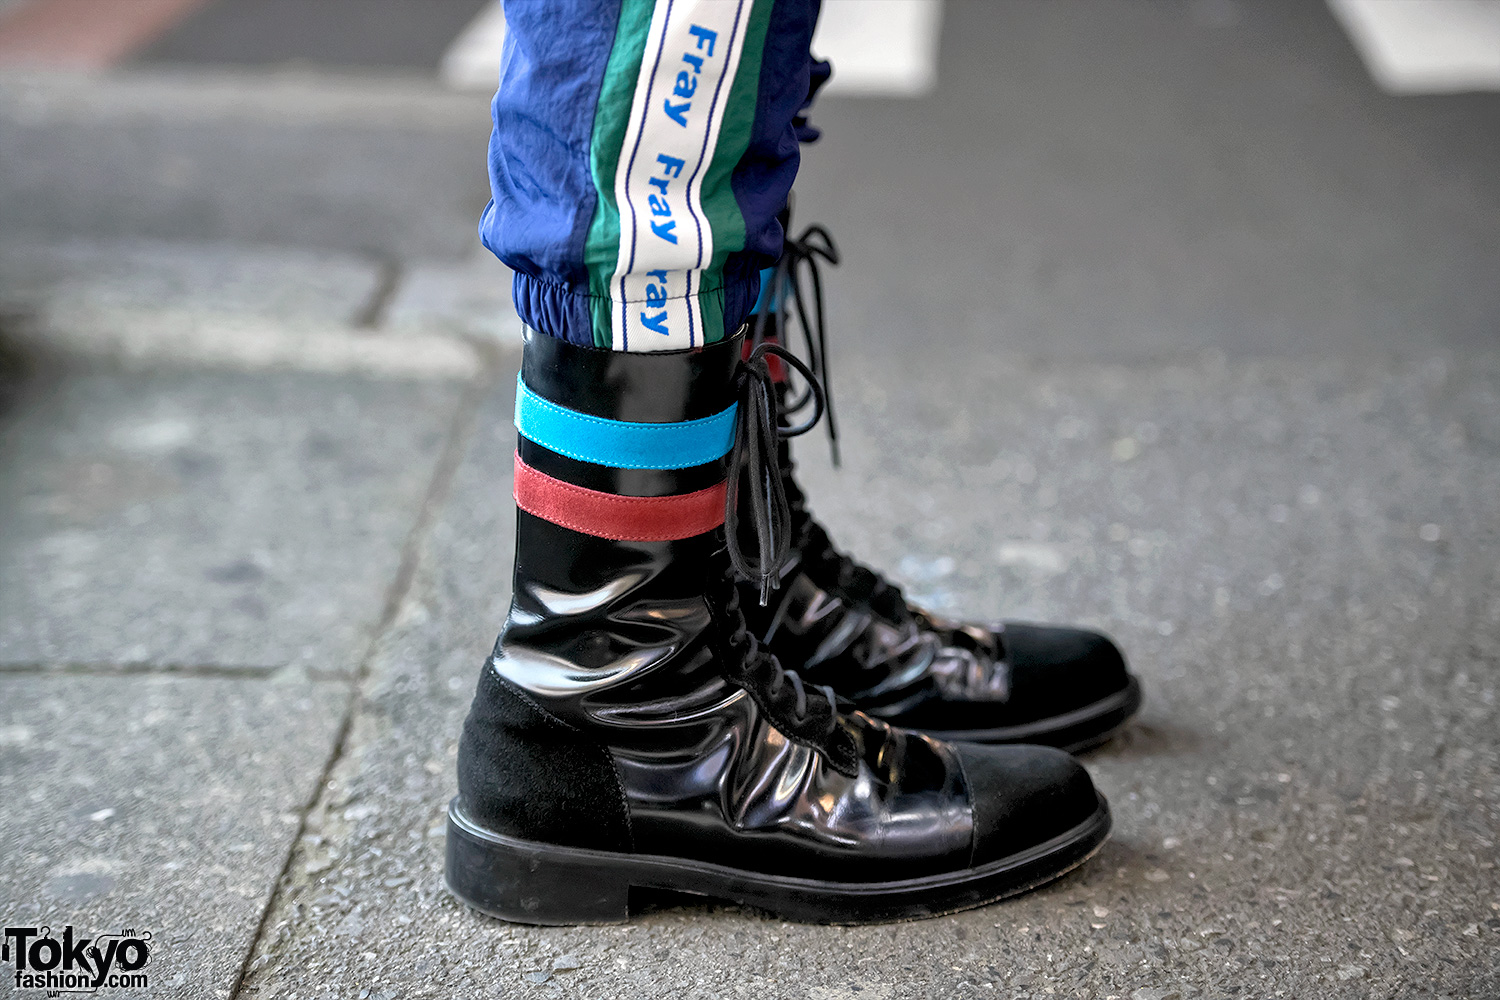 Numéro Homme Makes a Case for Streetwear Inspired Looks – The